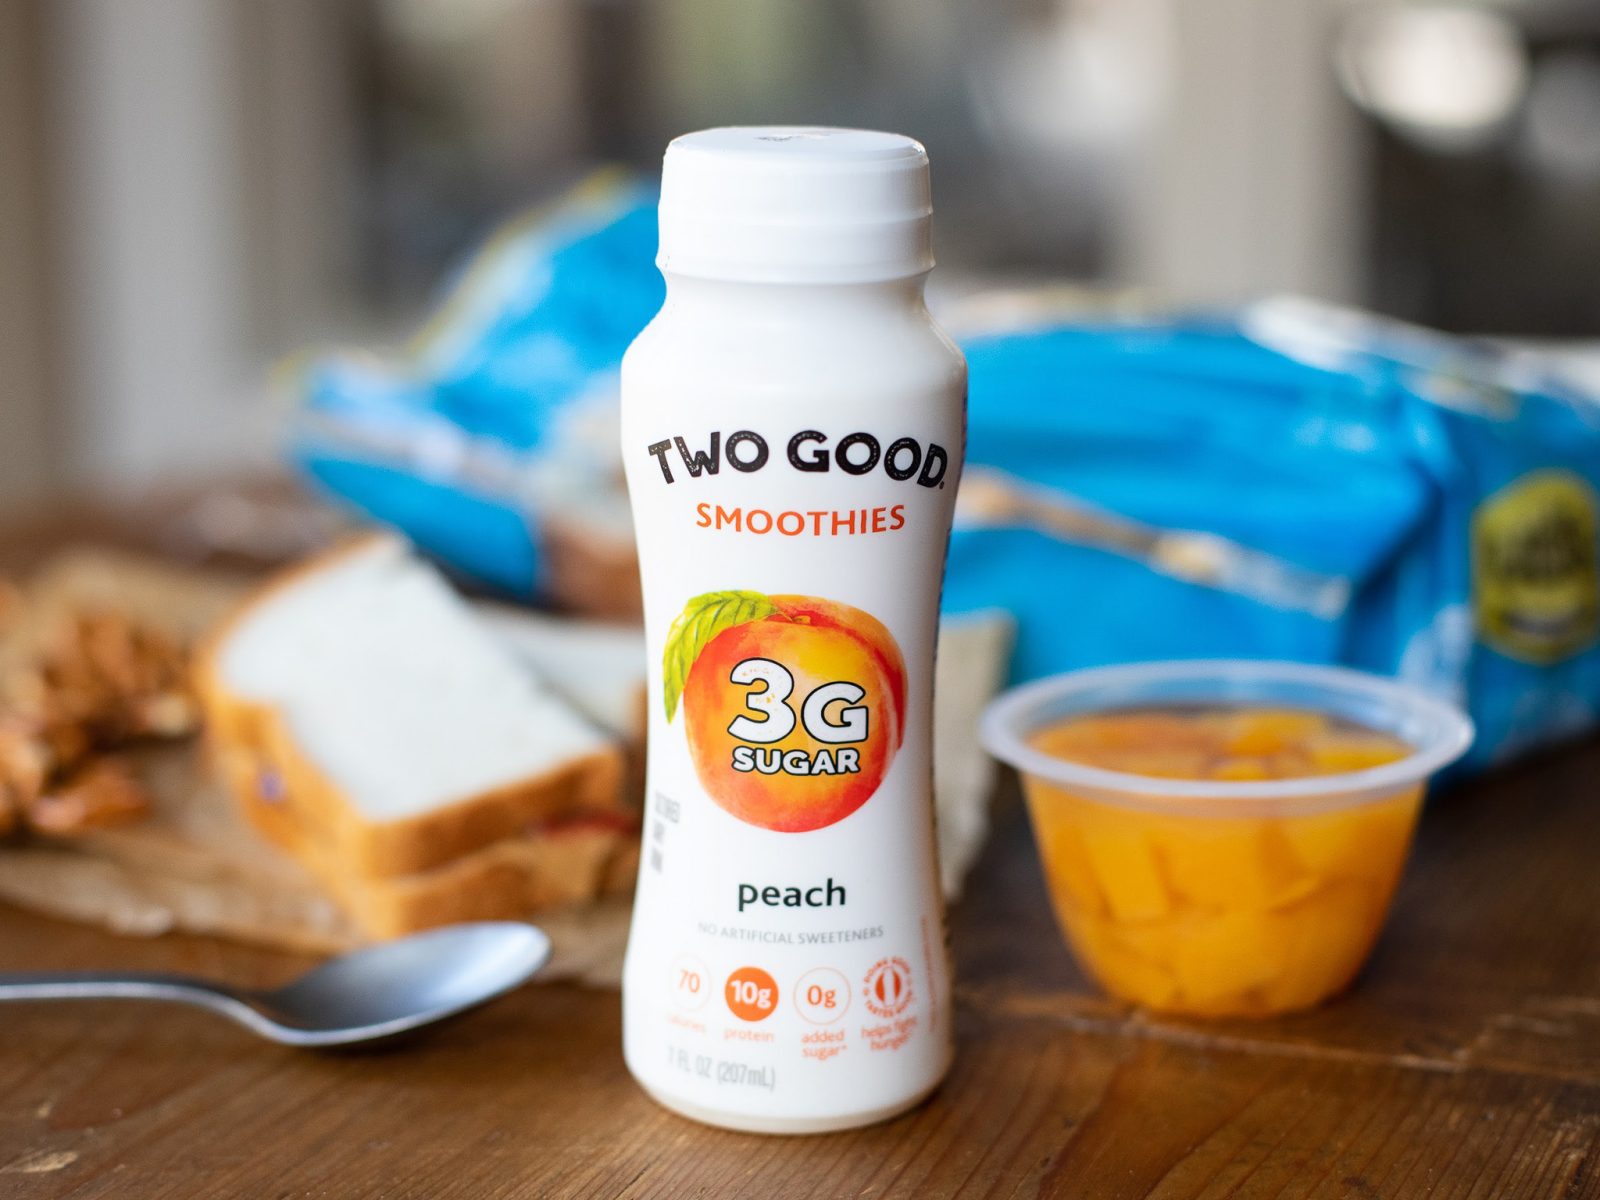 Get Two Good Smoothies For 64¢ At Kroger